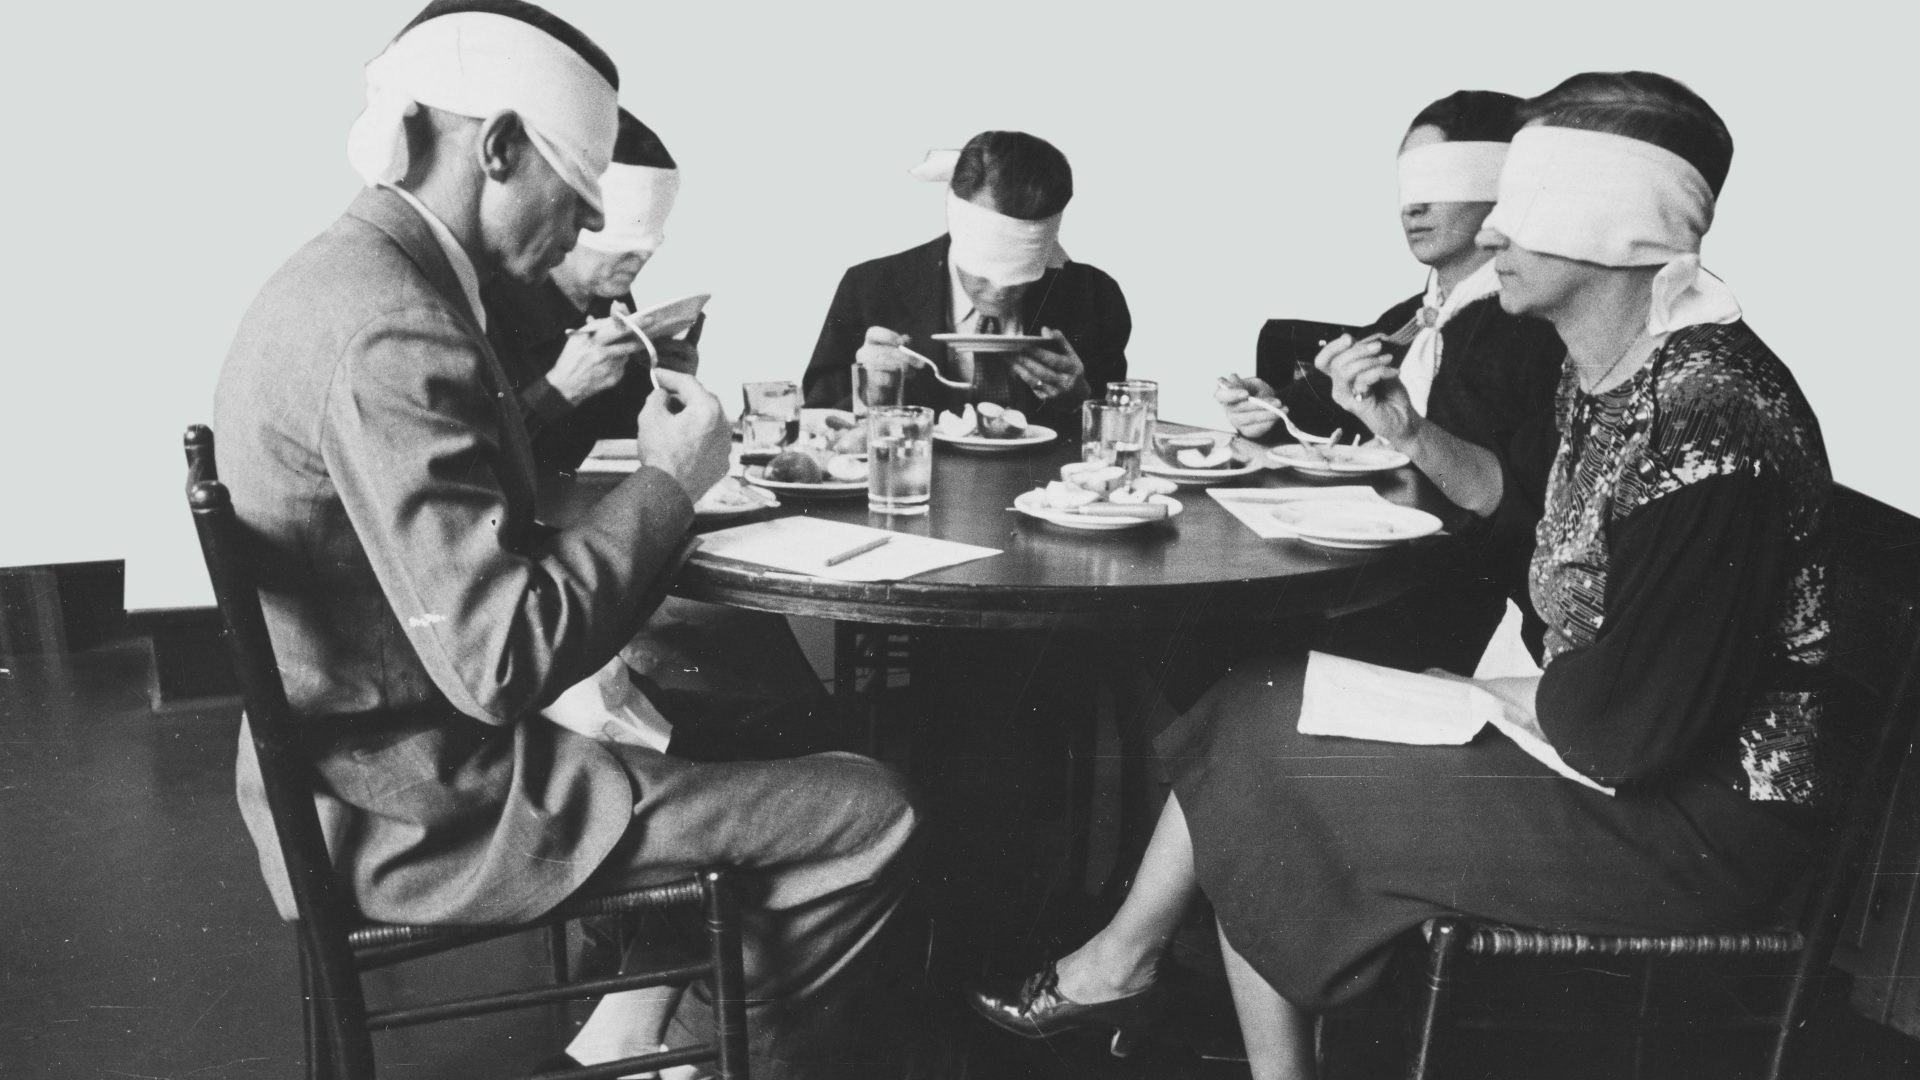 A blindfolded focus group taste-testing meats. Photo: Smith Collection/ Gado/Getty Images